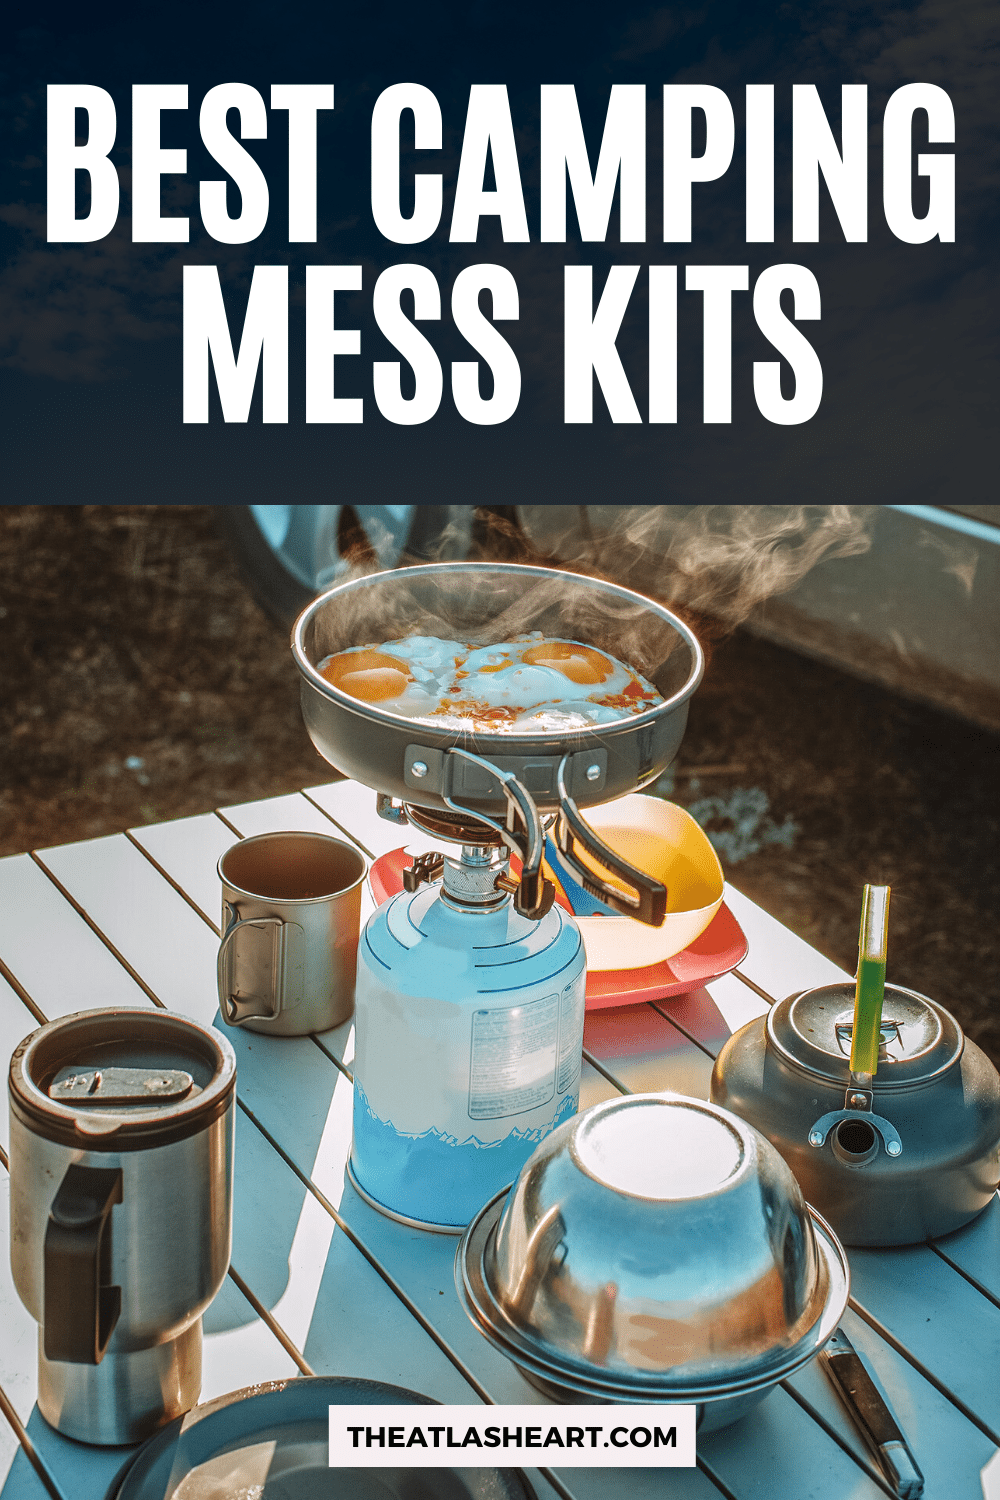 12 Best Camping Mess Kits for Your Next Trip in the Wild in 2022